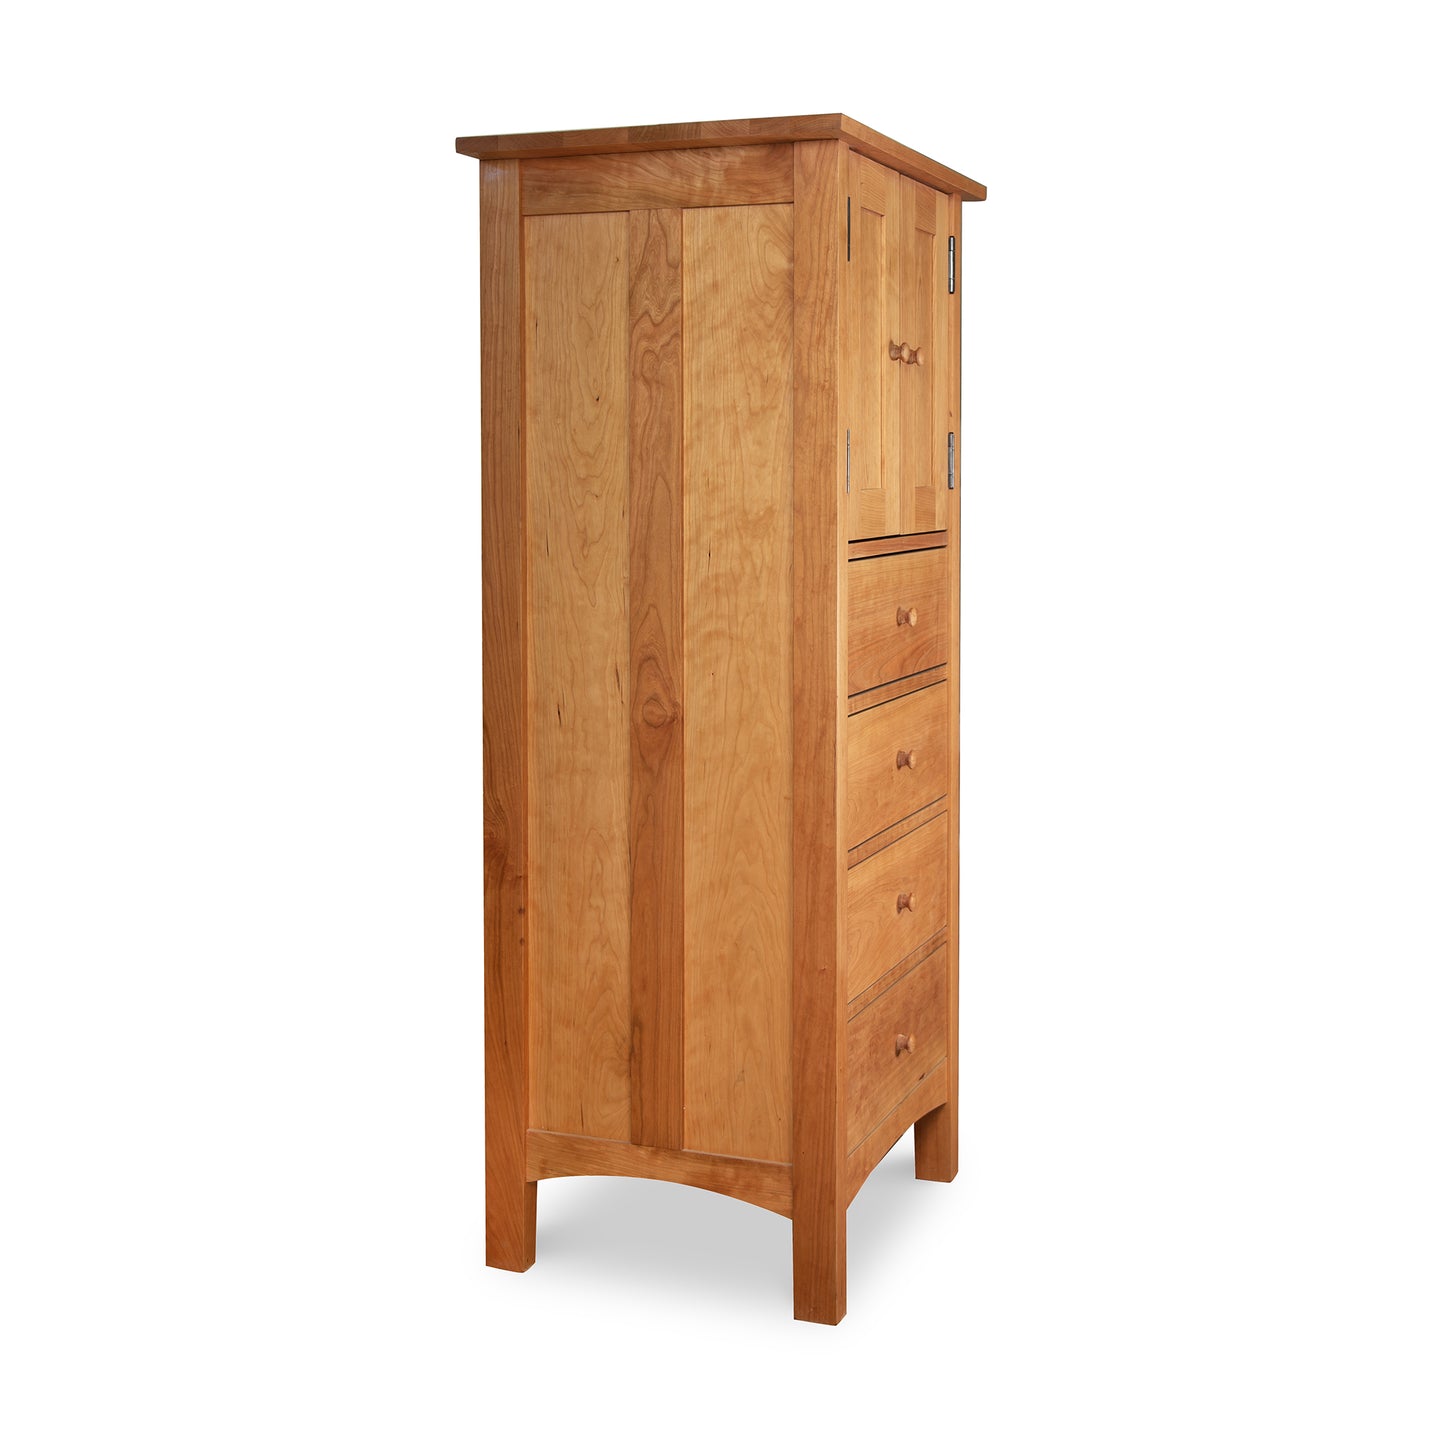 A Vermont Furniture Designs Burlington Shaker Tall Storage Chest, with a tall structure, featuring a single door on the left side and a vertical row of drawers on the right, all set against a white.